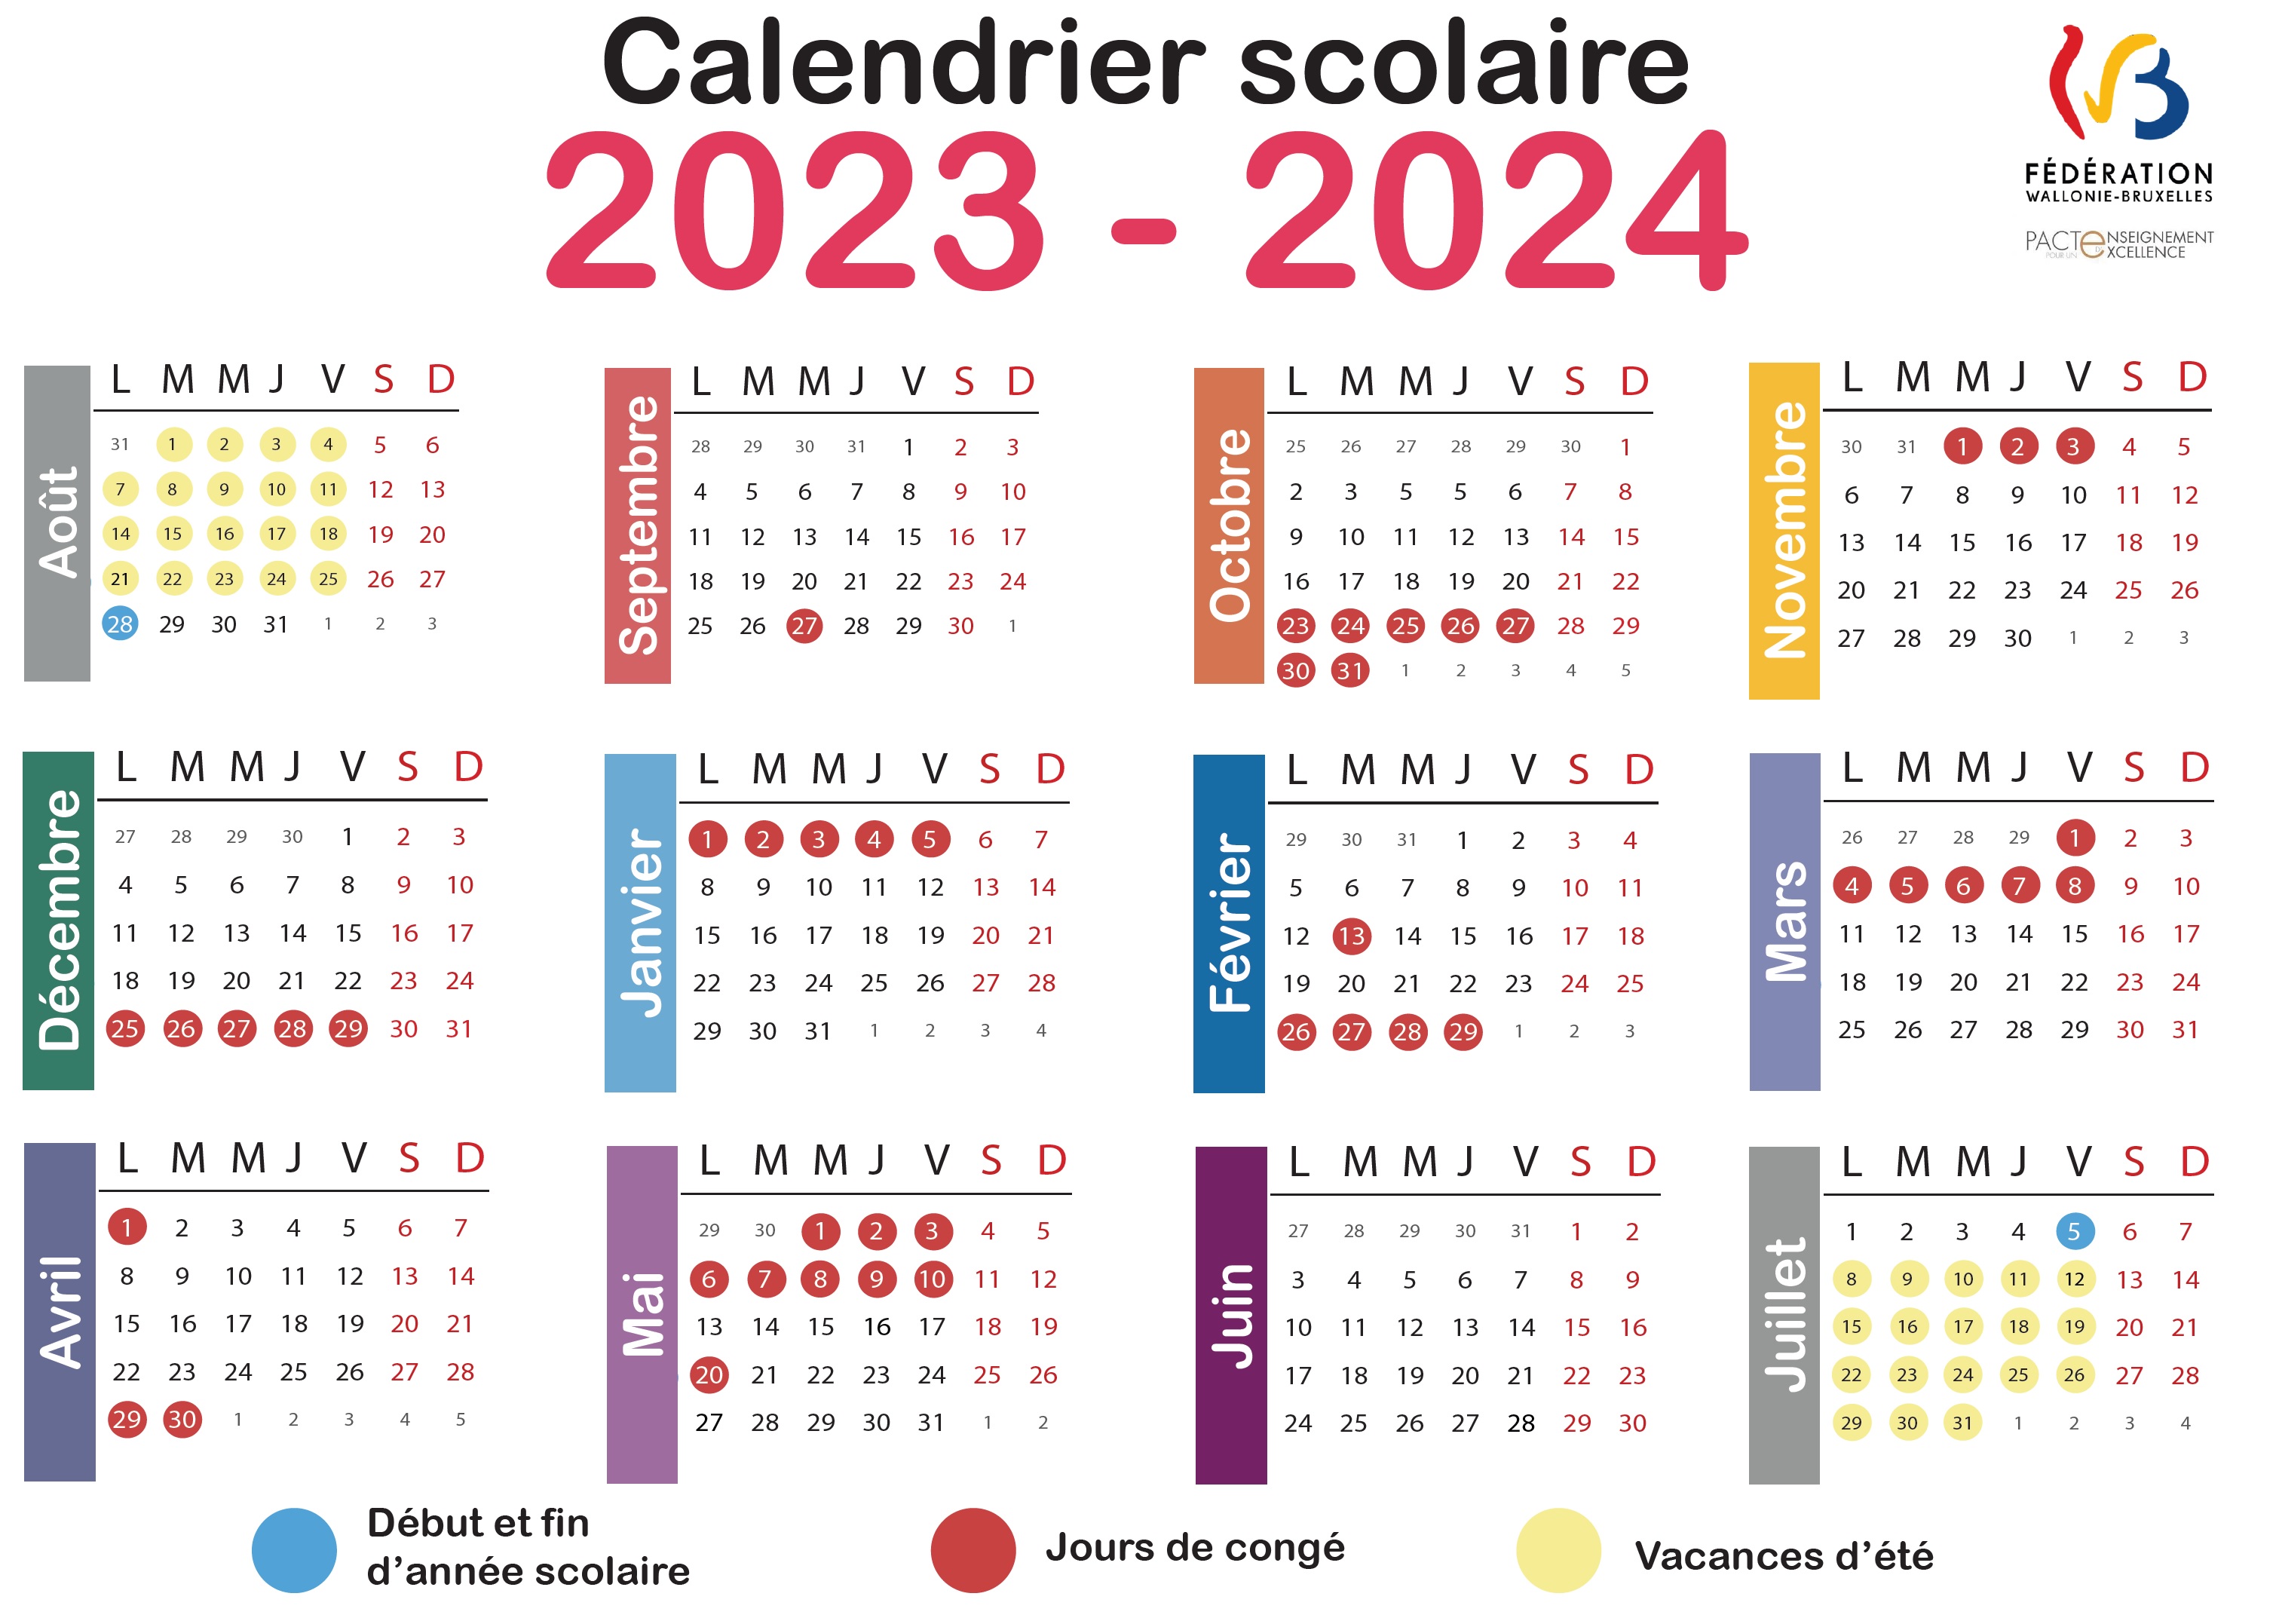 Calendrier_scolaire_2023-2024.jpg